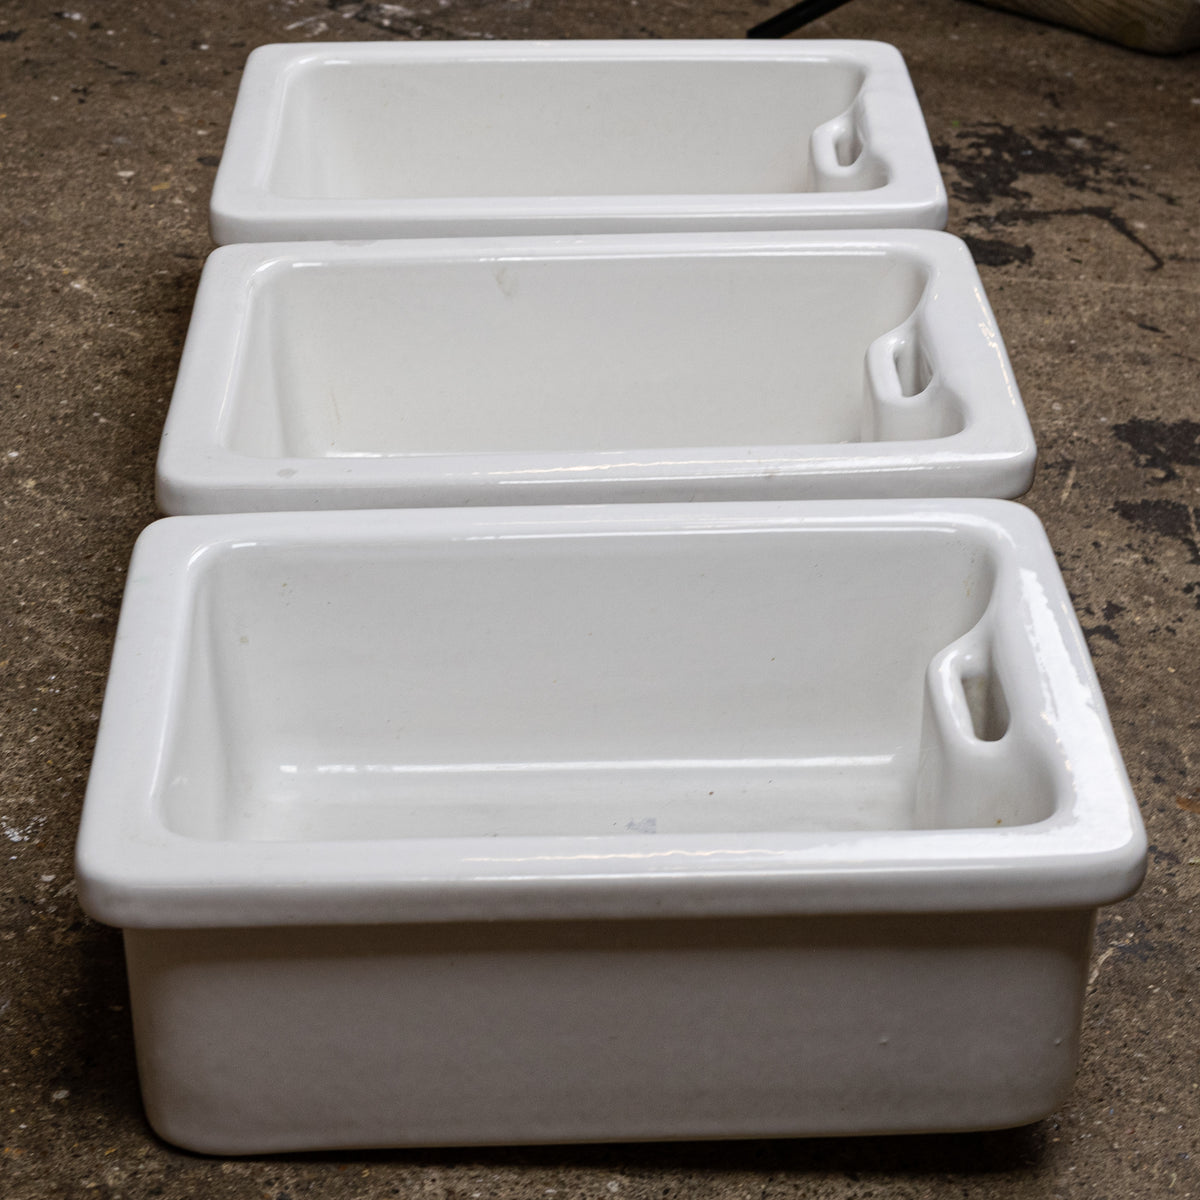 Reclaimed Royal Doulton School Butler Sinks (many available) | The Architectural Forum